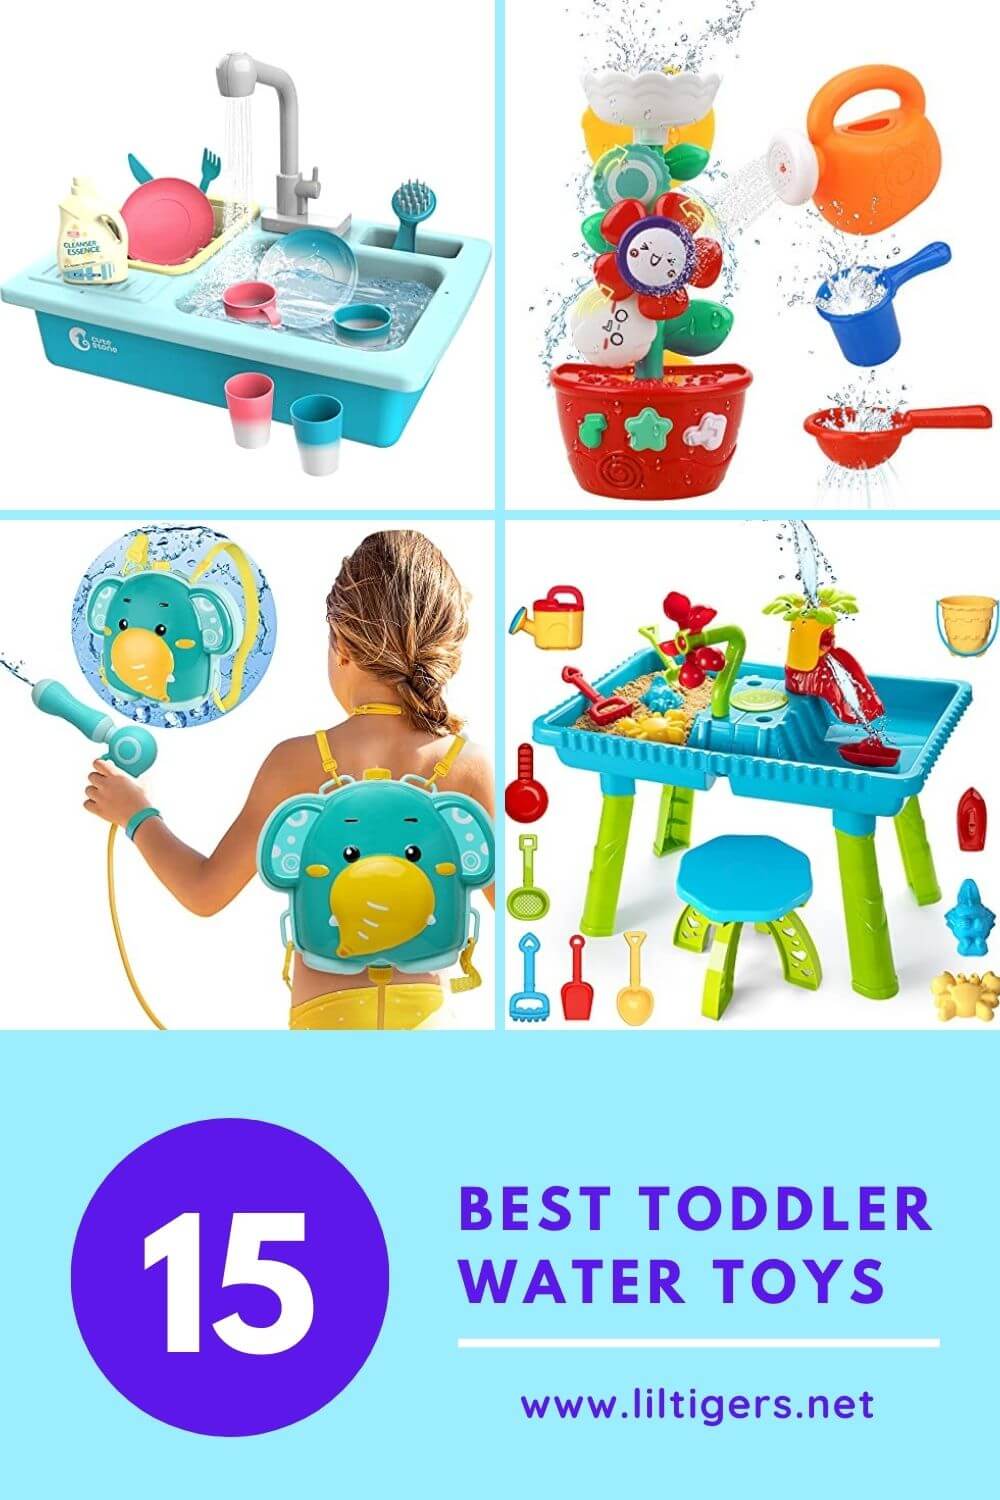 Best Toddler Water Toys